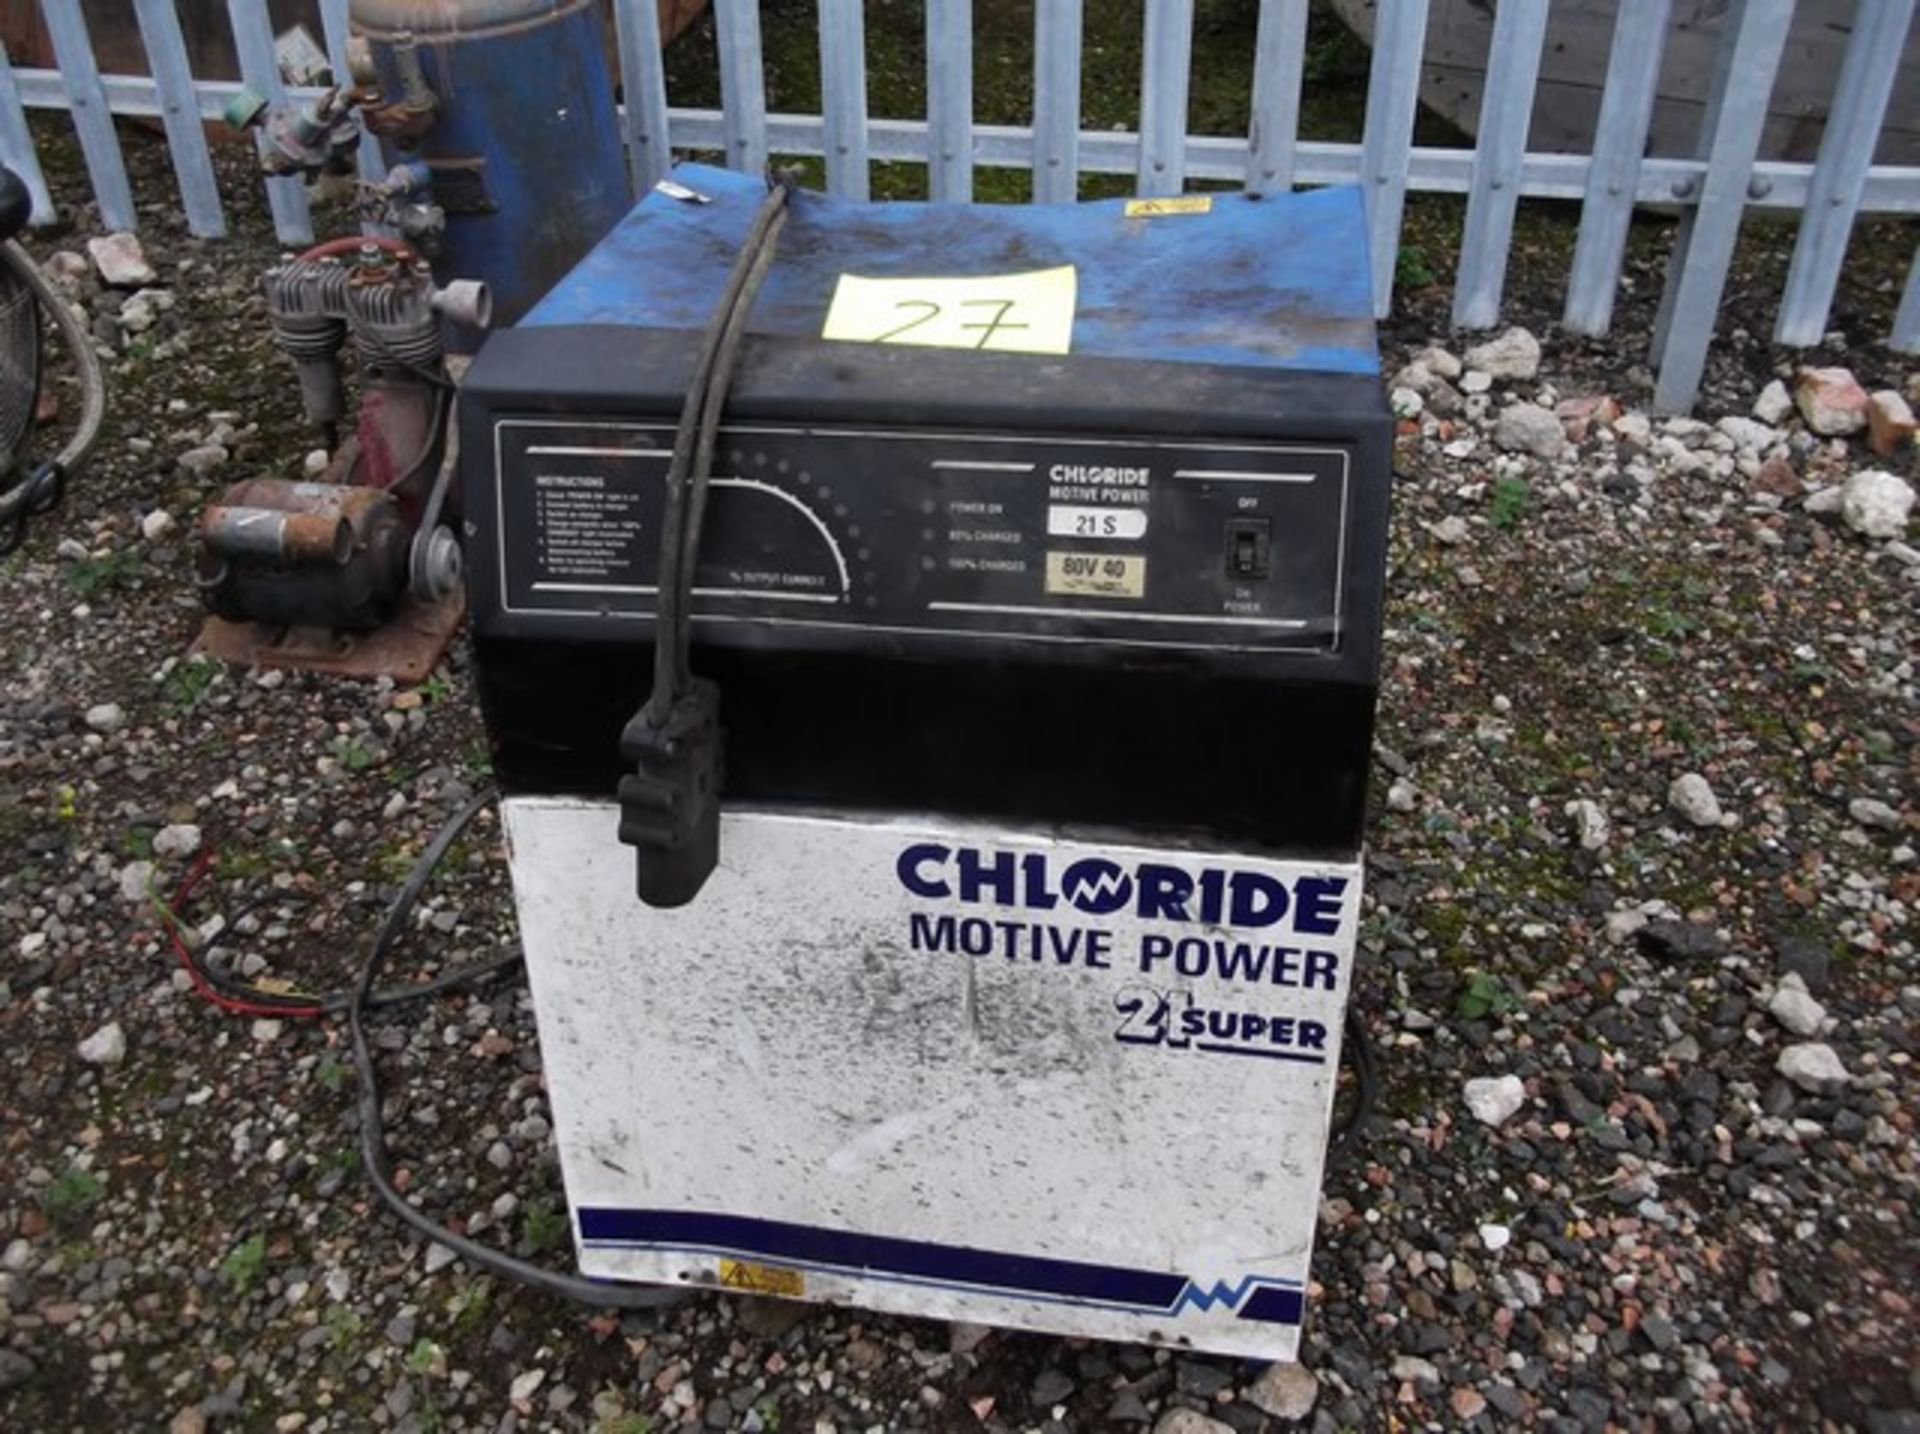 CHLORIDE 71 SUPER CHARGER